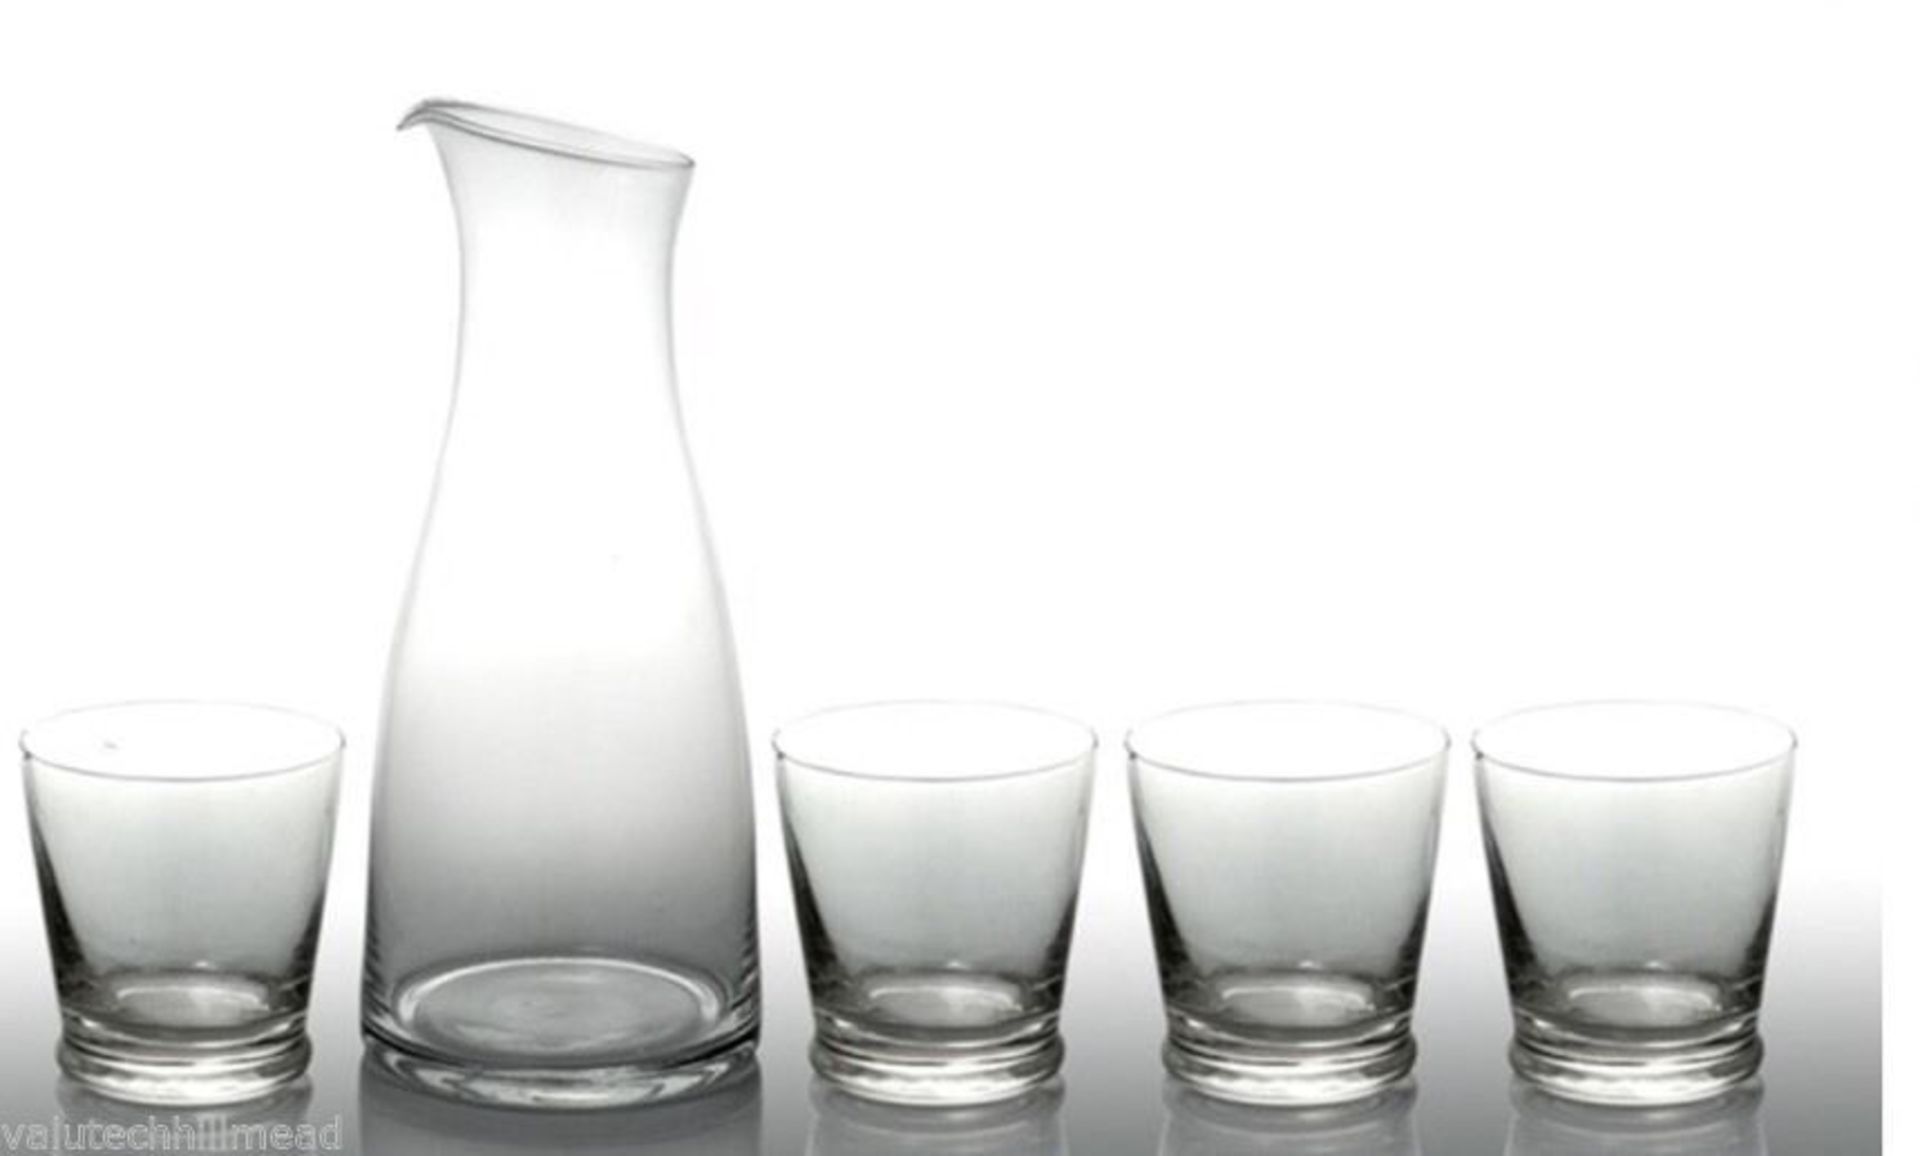 V Brand New Bistro & Co. 1.2L Glass Carafe With 4 Tumblers